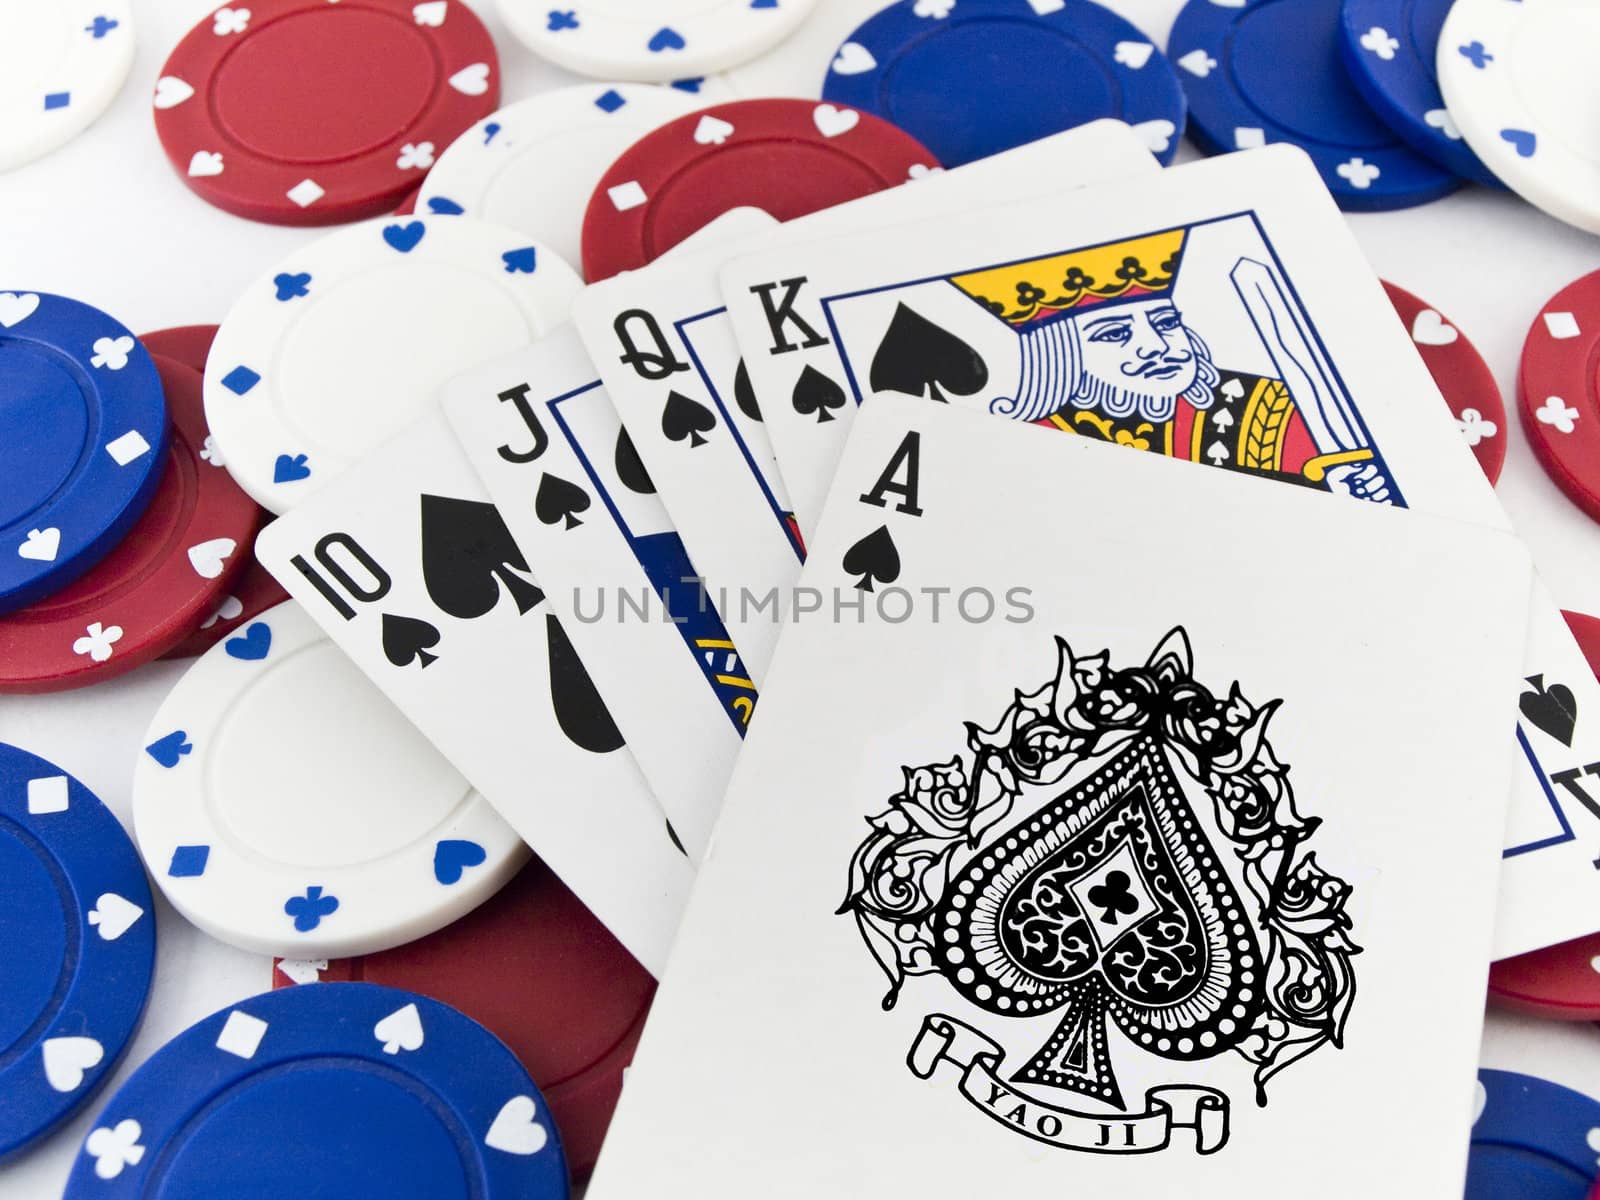 Red White and Blue Poker Chips and Royal Flush on White Backgrou by bobbigmac